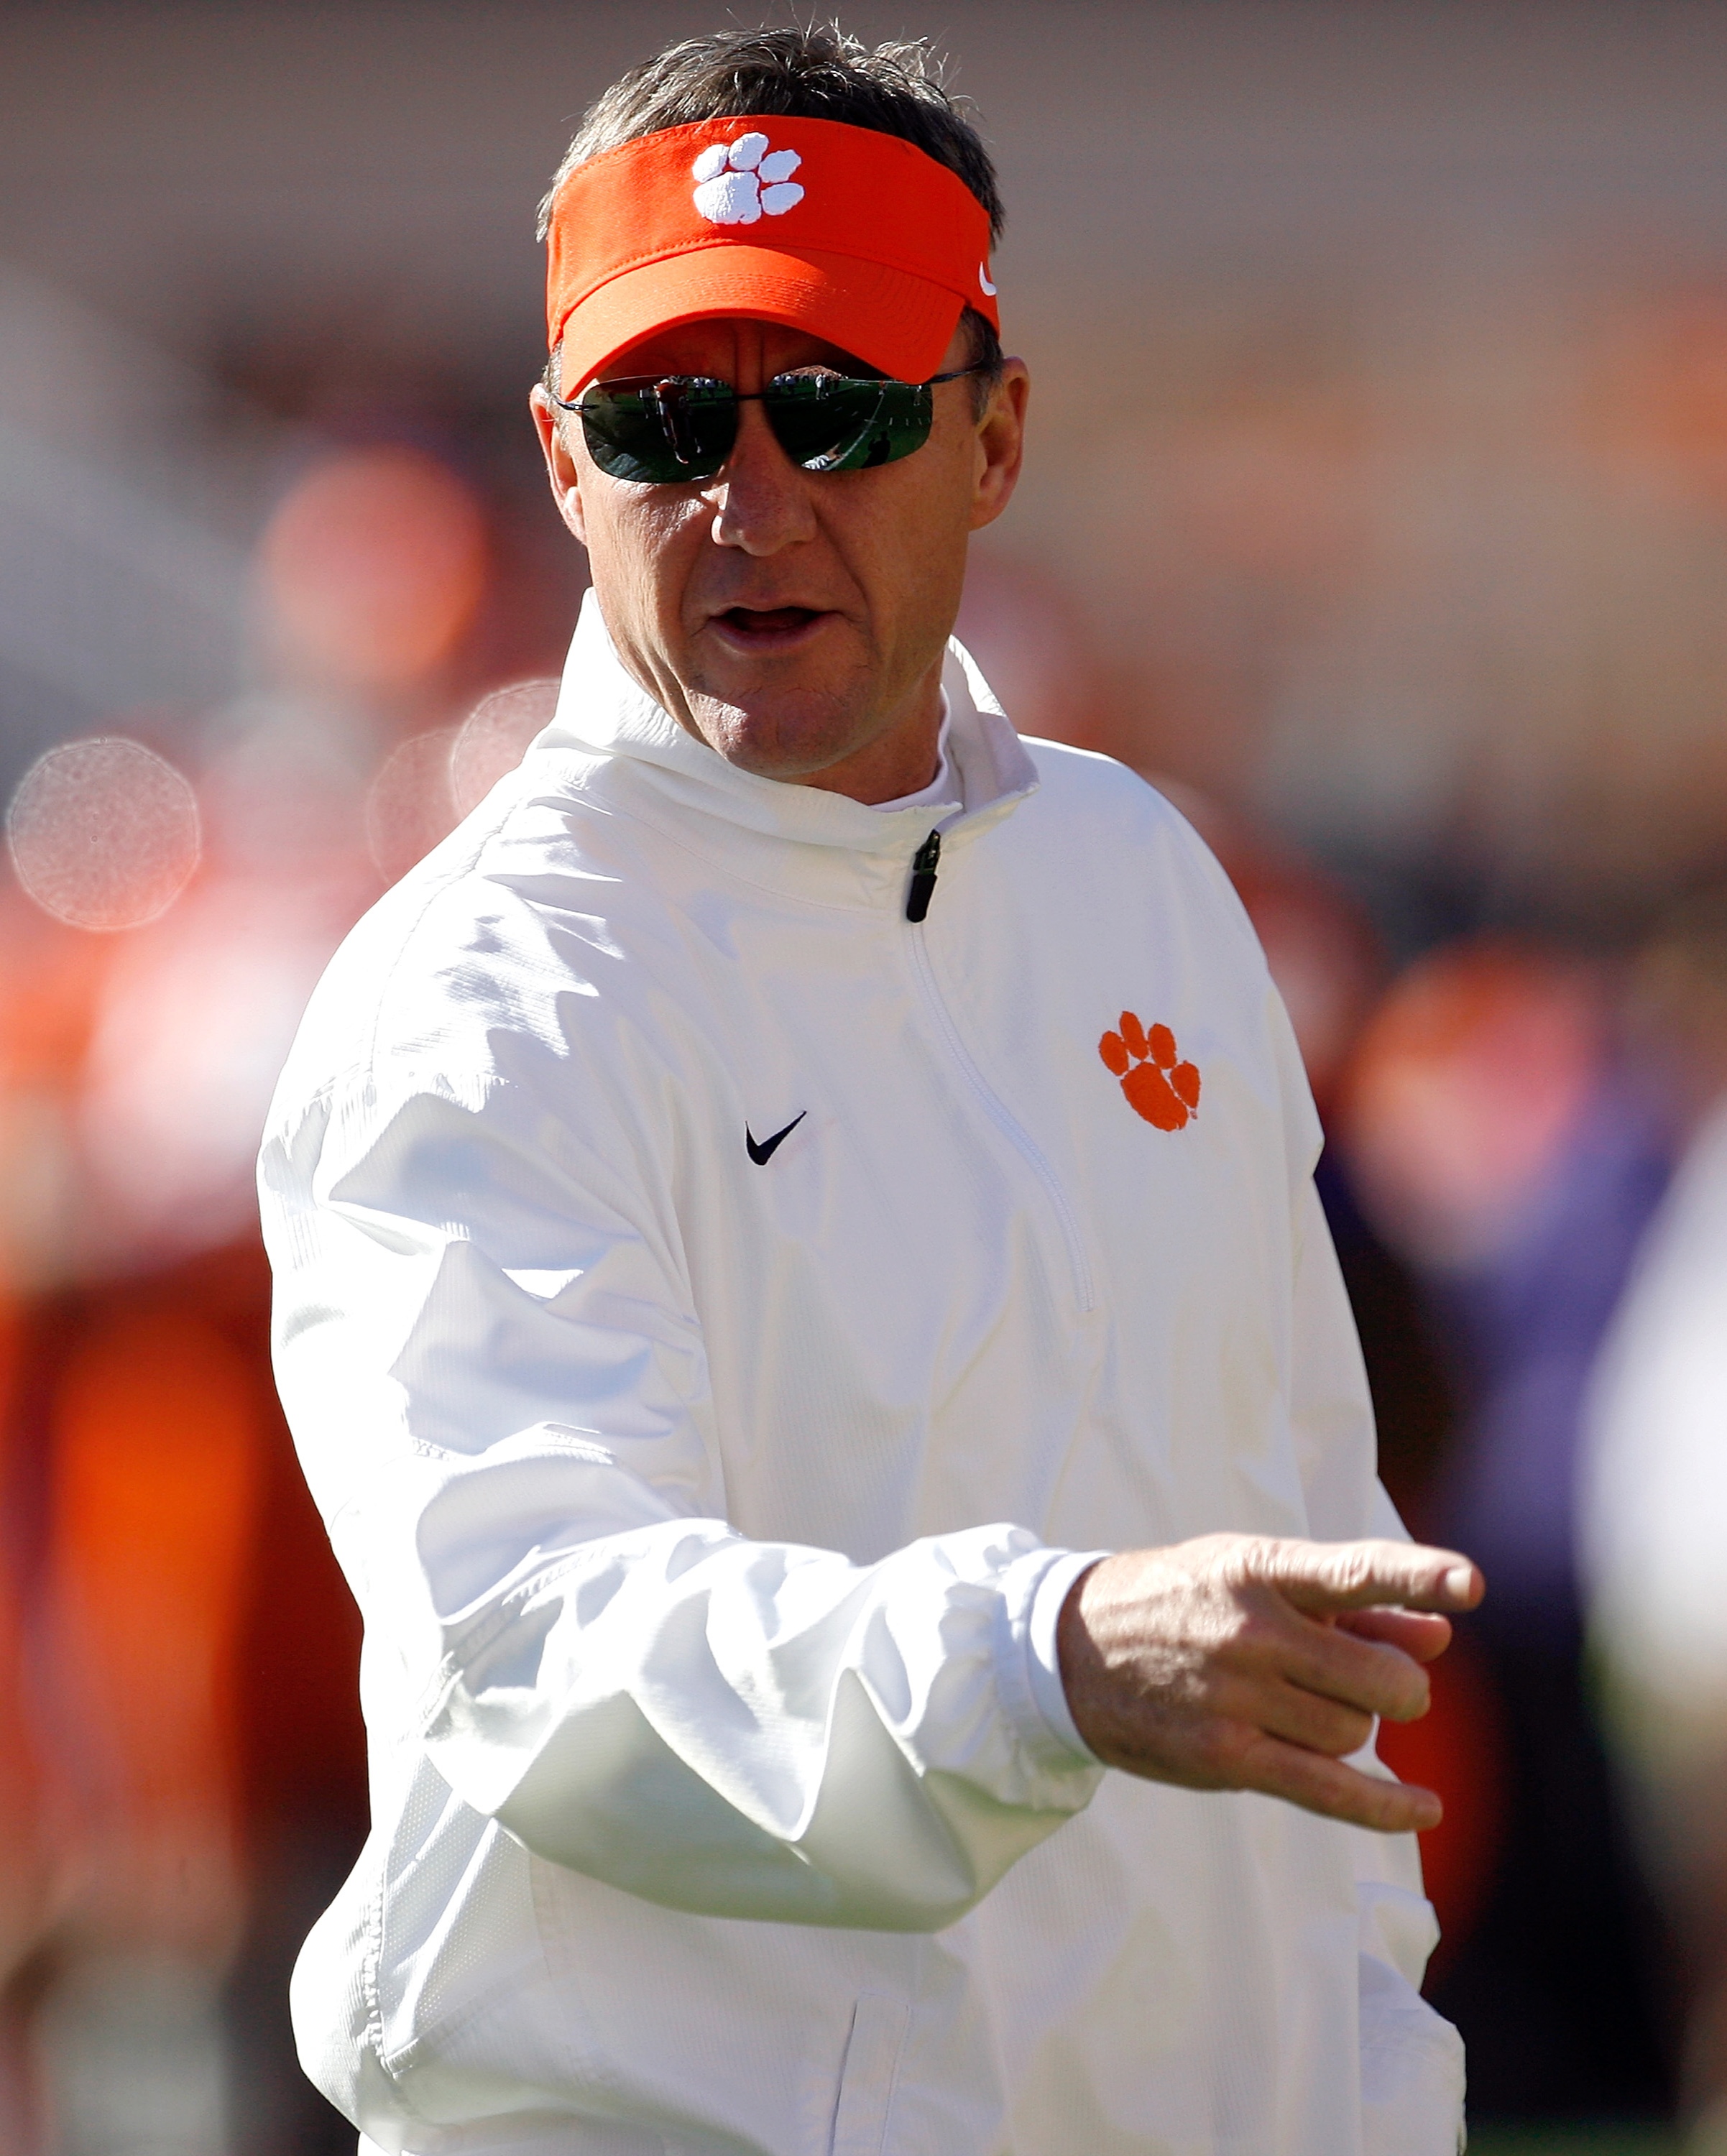 CLEMSON, SC - NOVEMBER 29: Offensive Coordinator Chad Morris of the Clemson Tigers looks on prior to their game against the South Carolina Gamecocks at Memorial Stadium on November 29, 2014 in Clemson, South Carolina. (Photo by Tyler Smith/Getty Images)